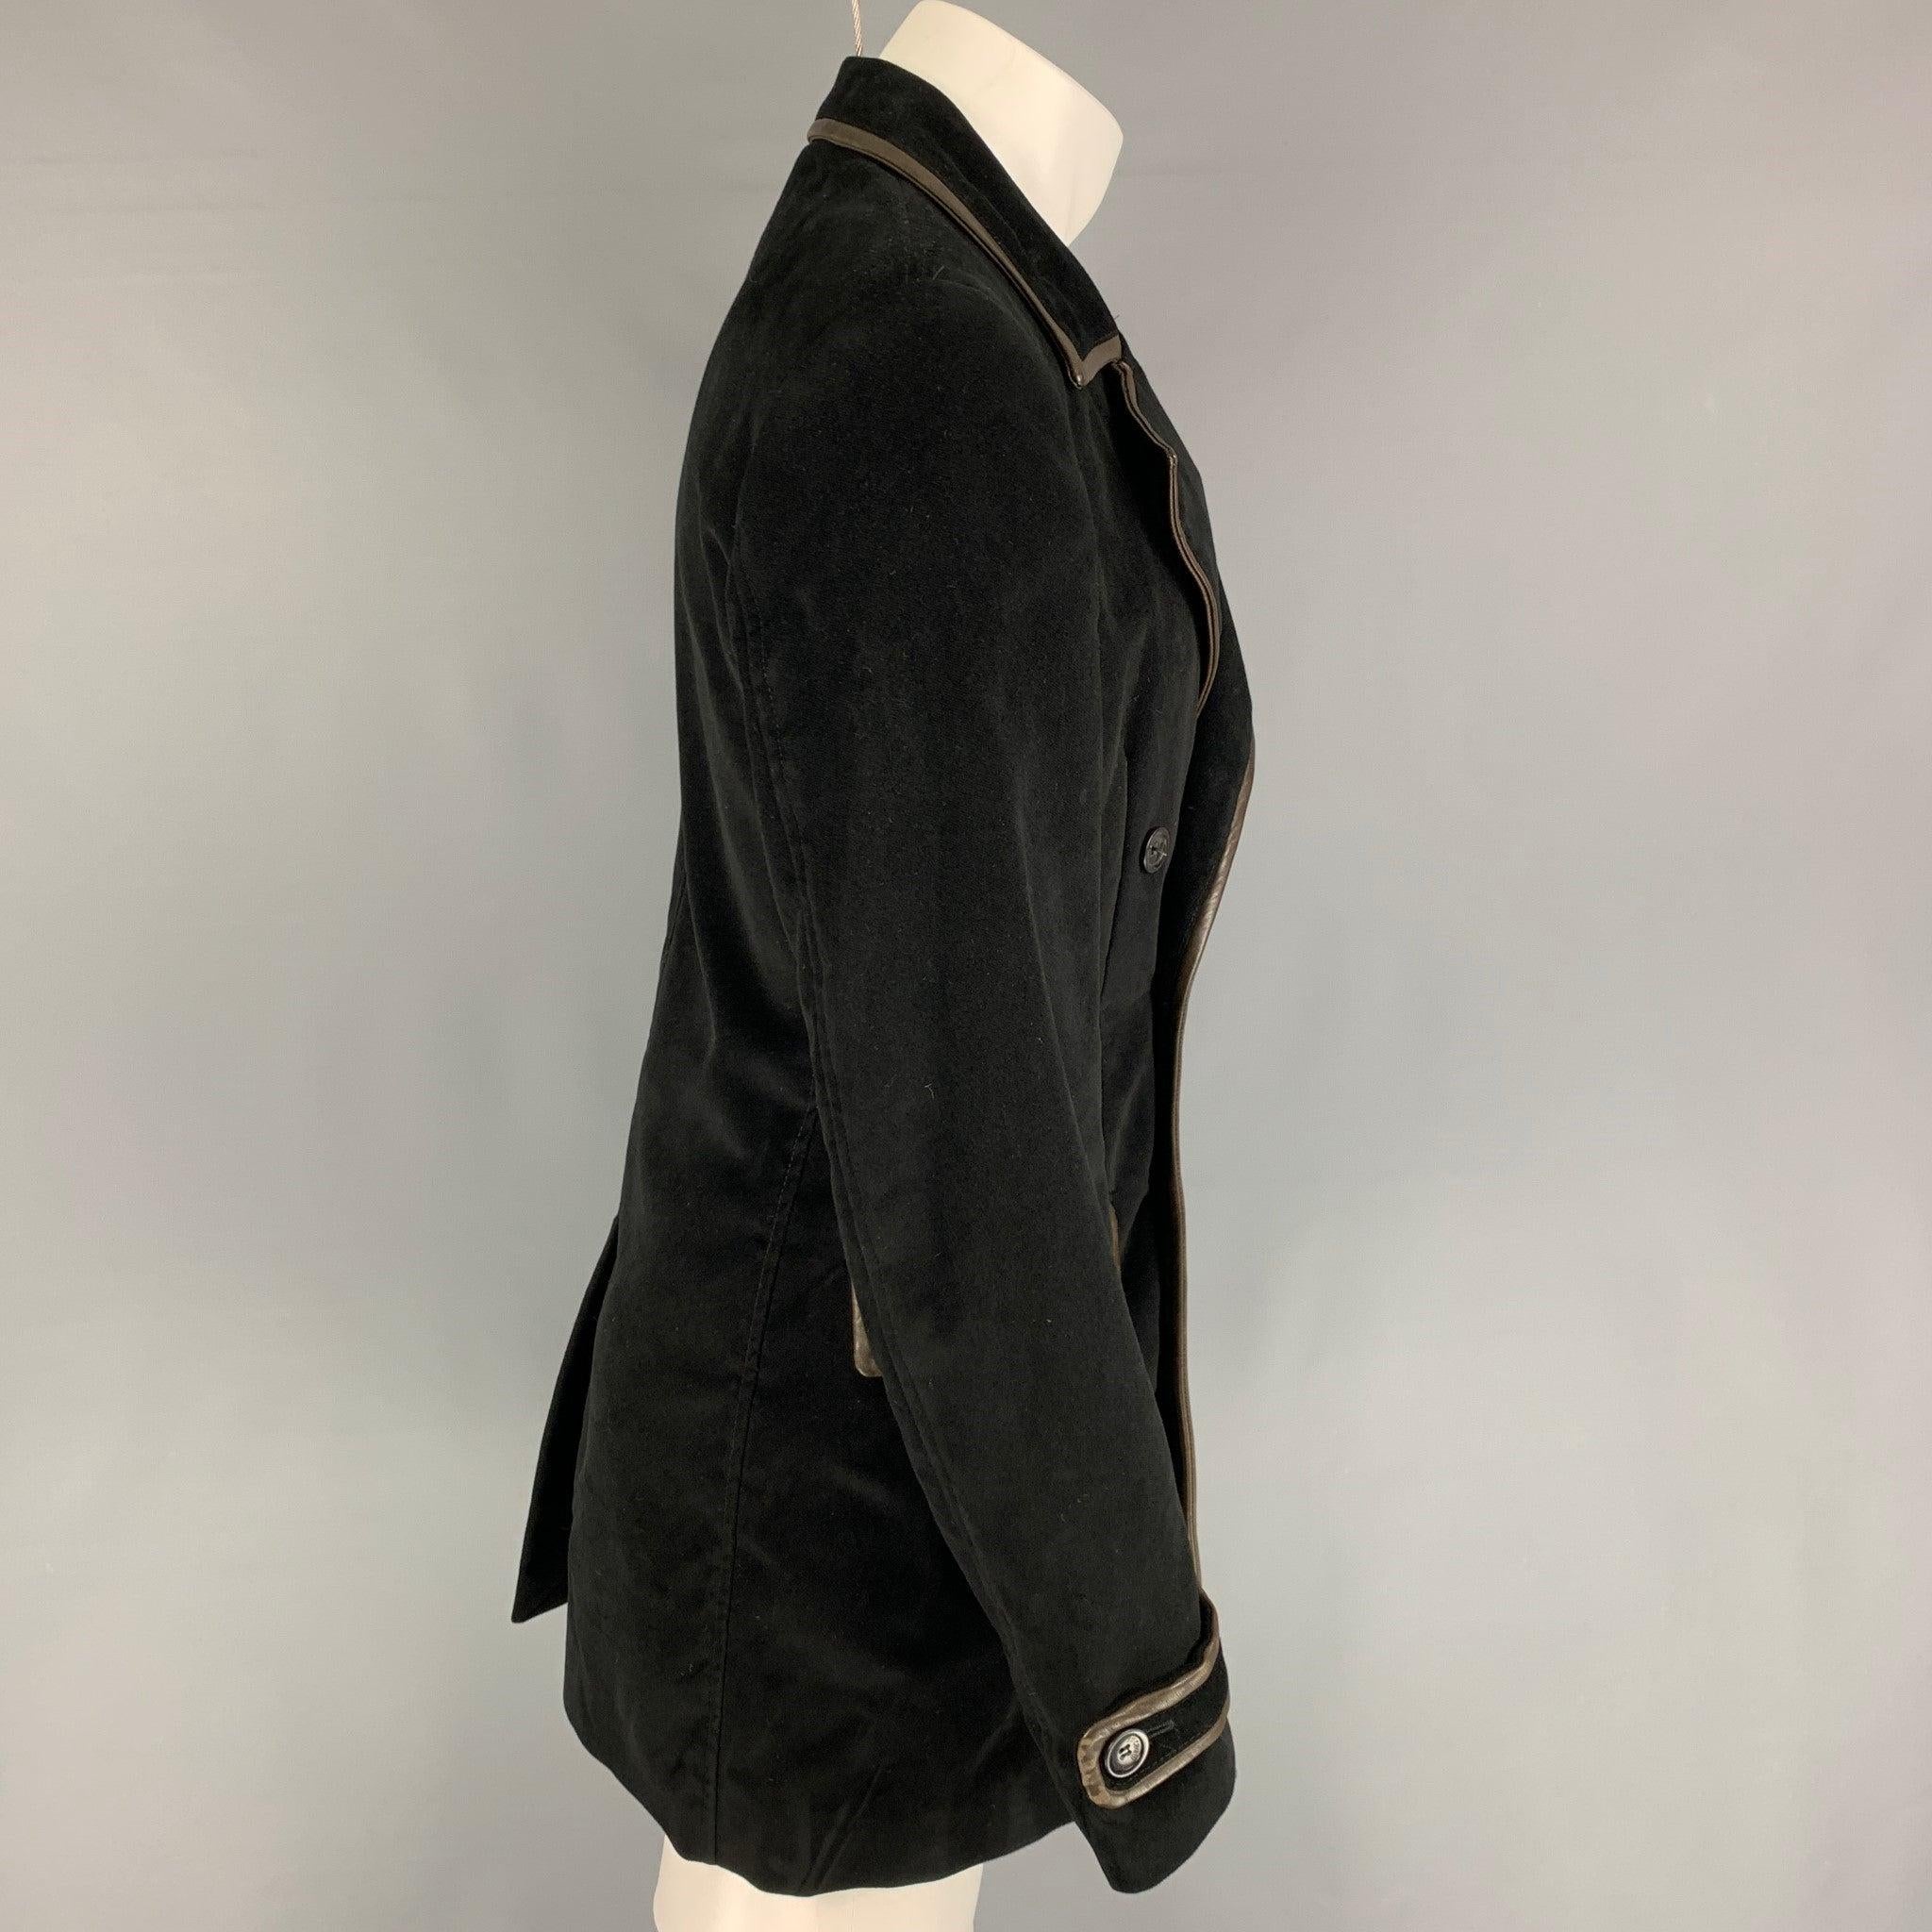 JUST CAVALLI coat comes in a black viscose / cotton with a full liner featuring a leather trim, notch lapel, lap pockets, single back vent, and a double breasted closure. Made in Italy.
Very Good
Pre-Owned Condition. 

Marked:   Size tag removed. 